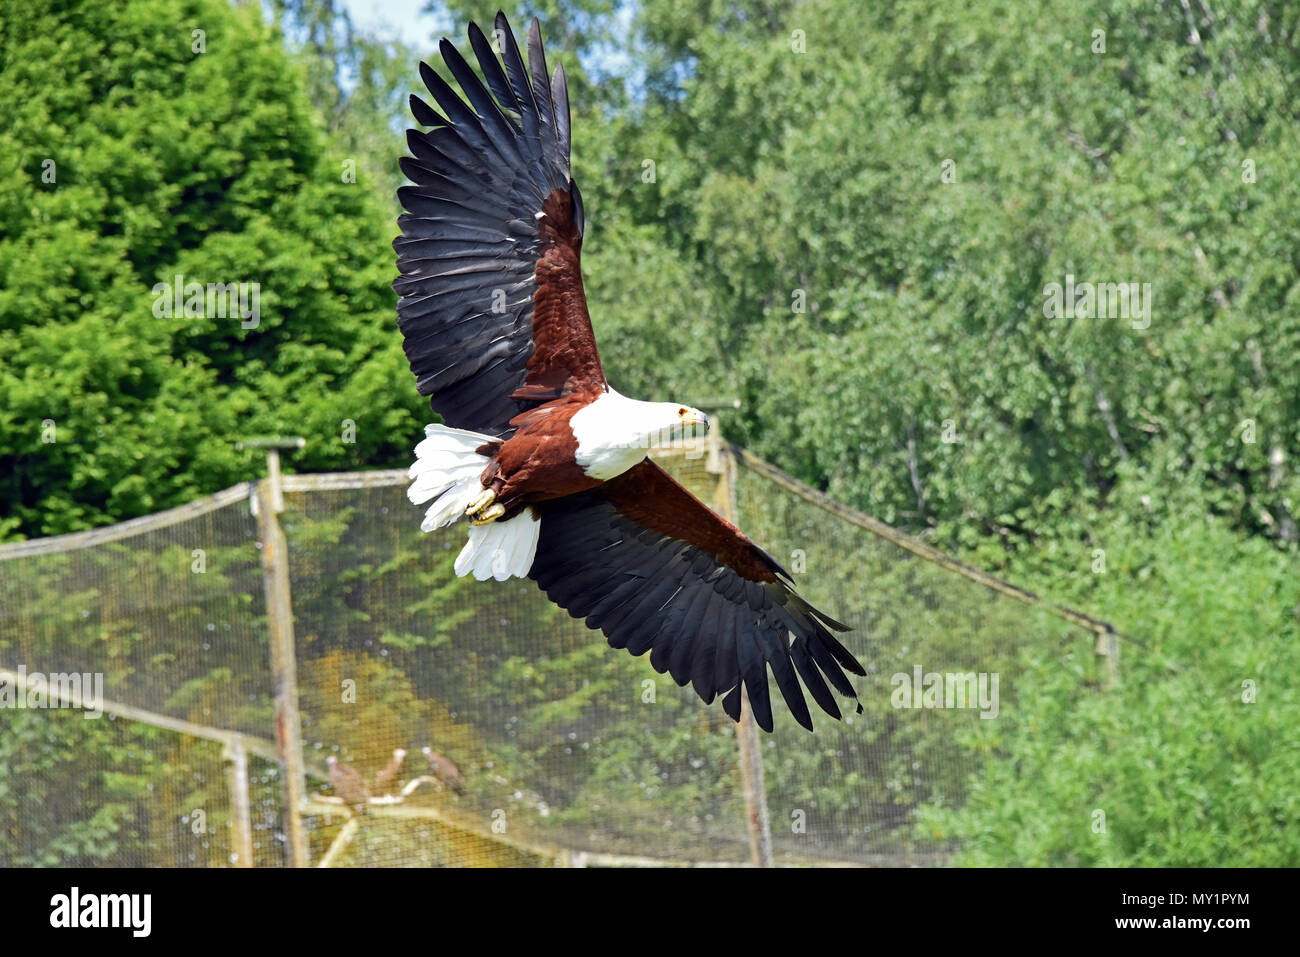 An African Fish Eagle (Haliaeetus vocifer) in flight at the Hawk Conservancy Trust in Southern England Stock Photo